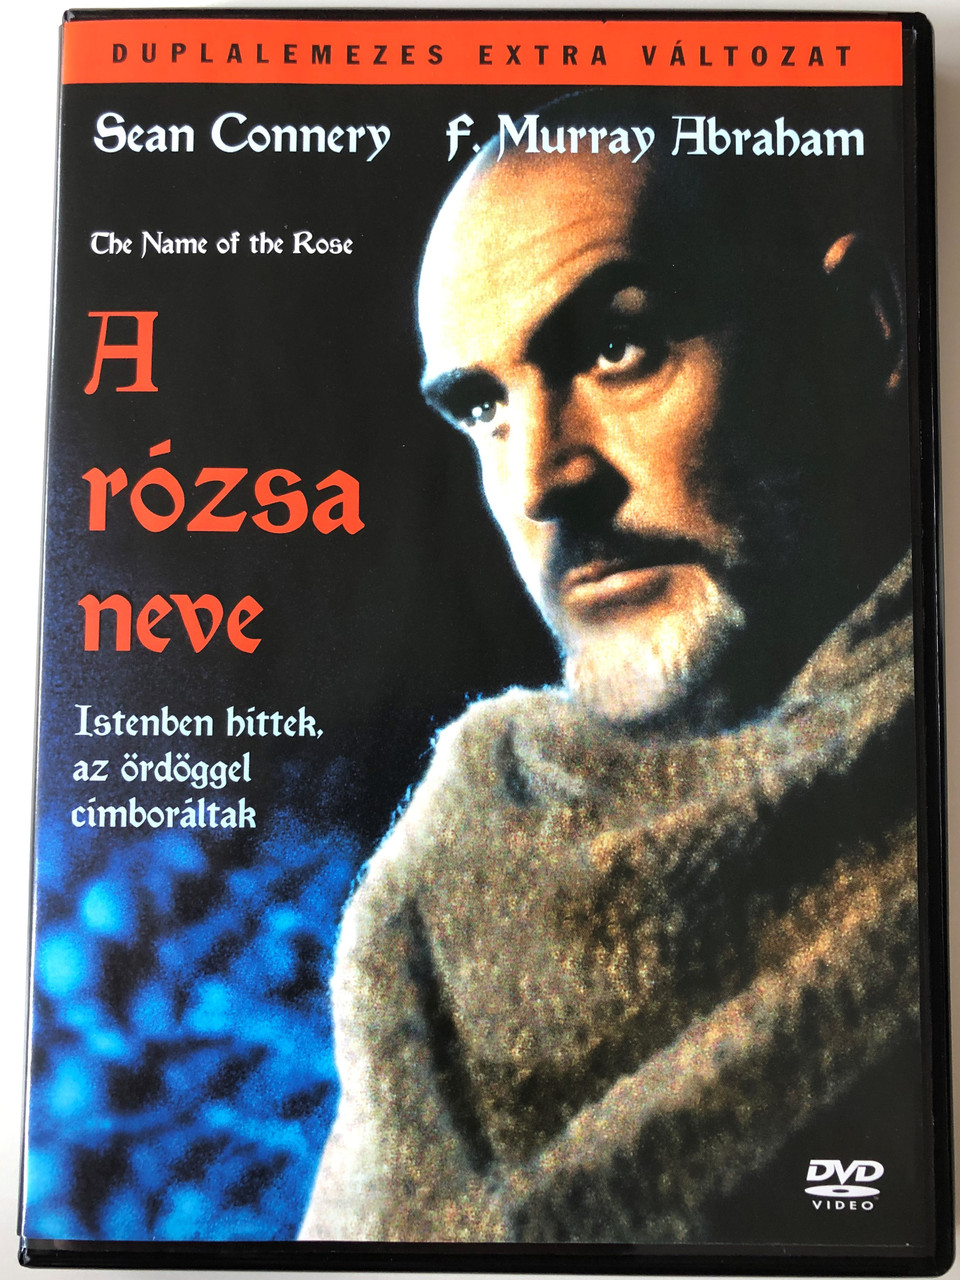 The name of the Rose (A rózsa neve) 2 DVD 1986 / Directed by Jean-Jacques  Annaud /